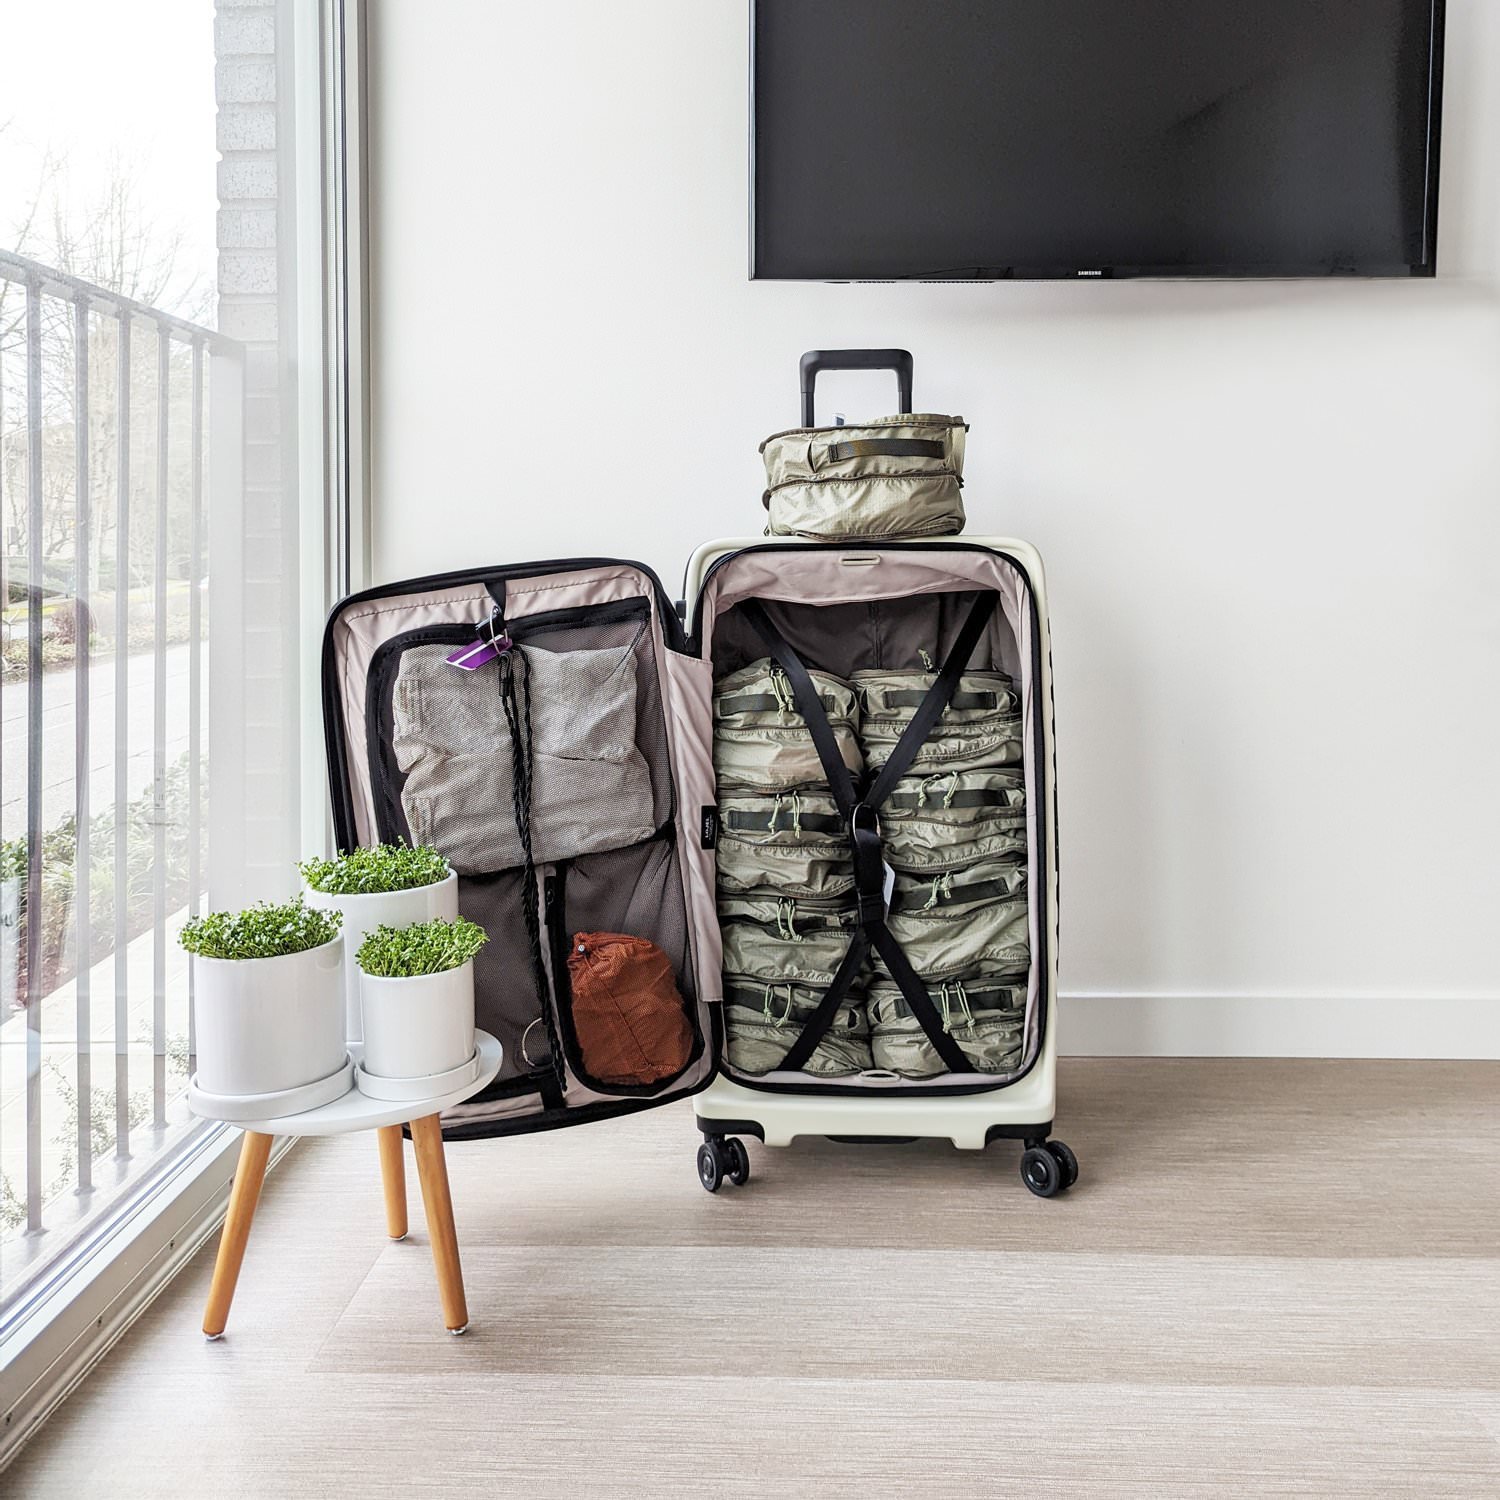 Traveling With My LOJEL Cubo Luggage (a Full Review) | Peacefully